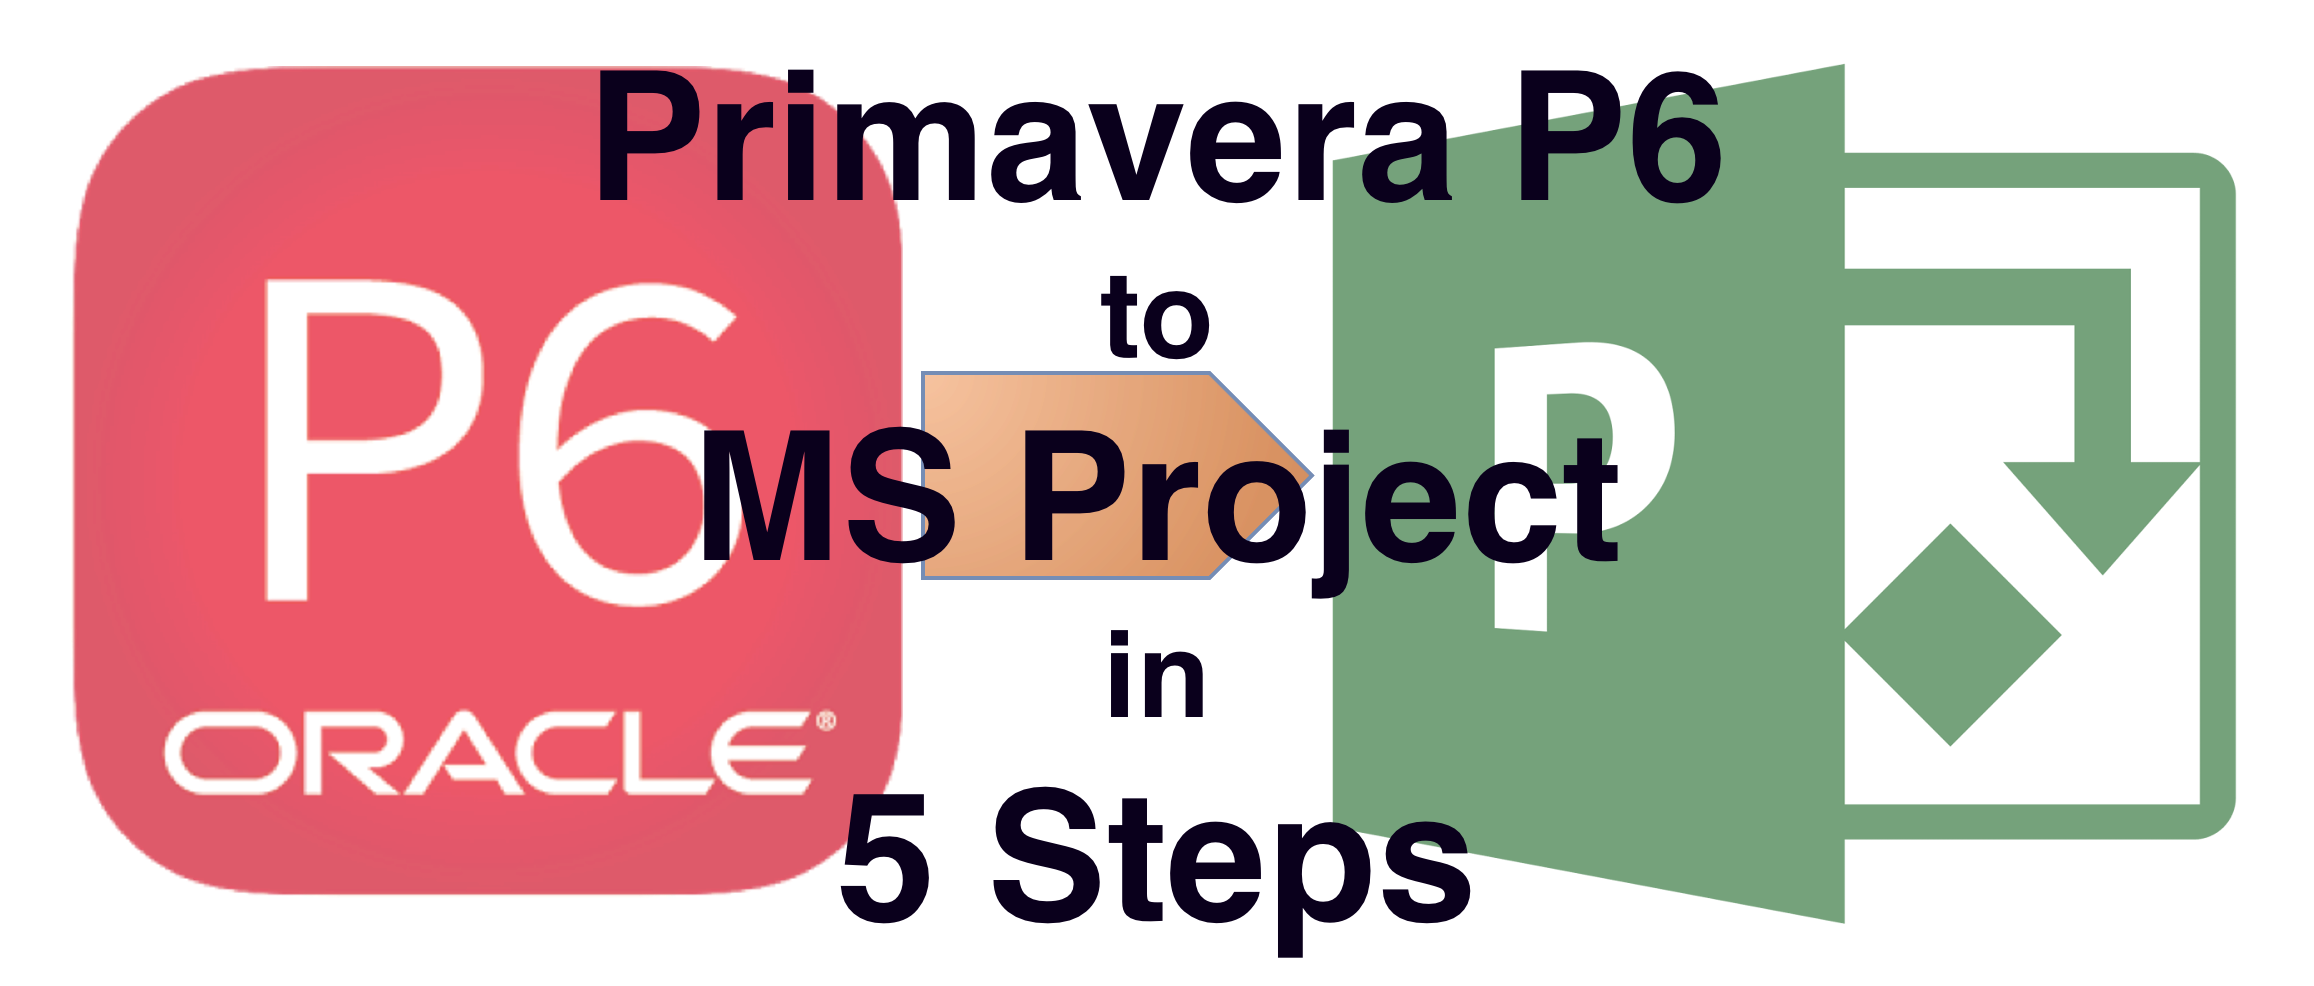 Primavera P6 to MS Project in 5 Steps